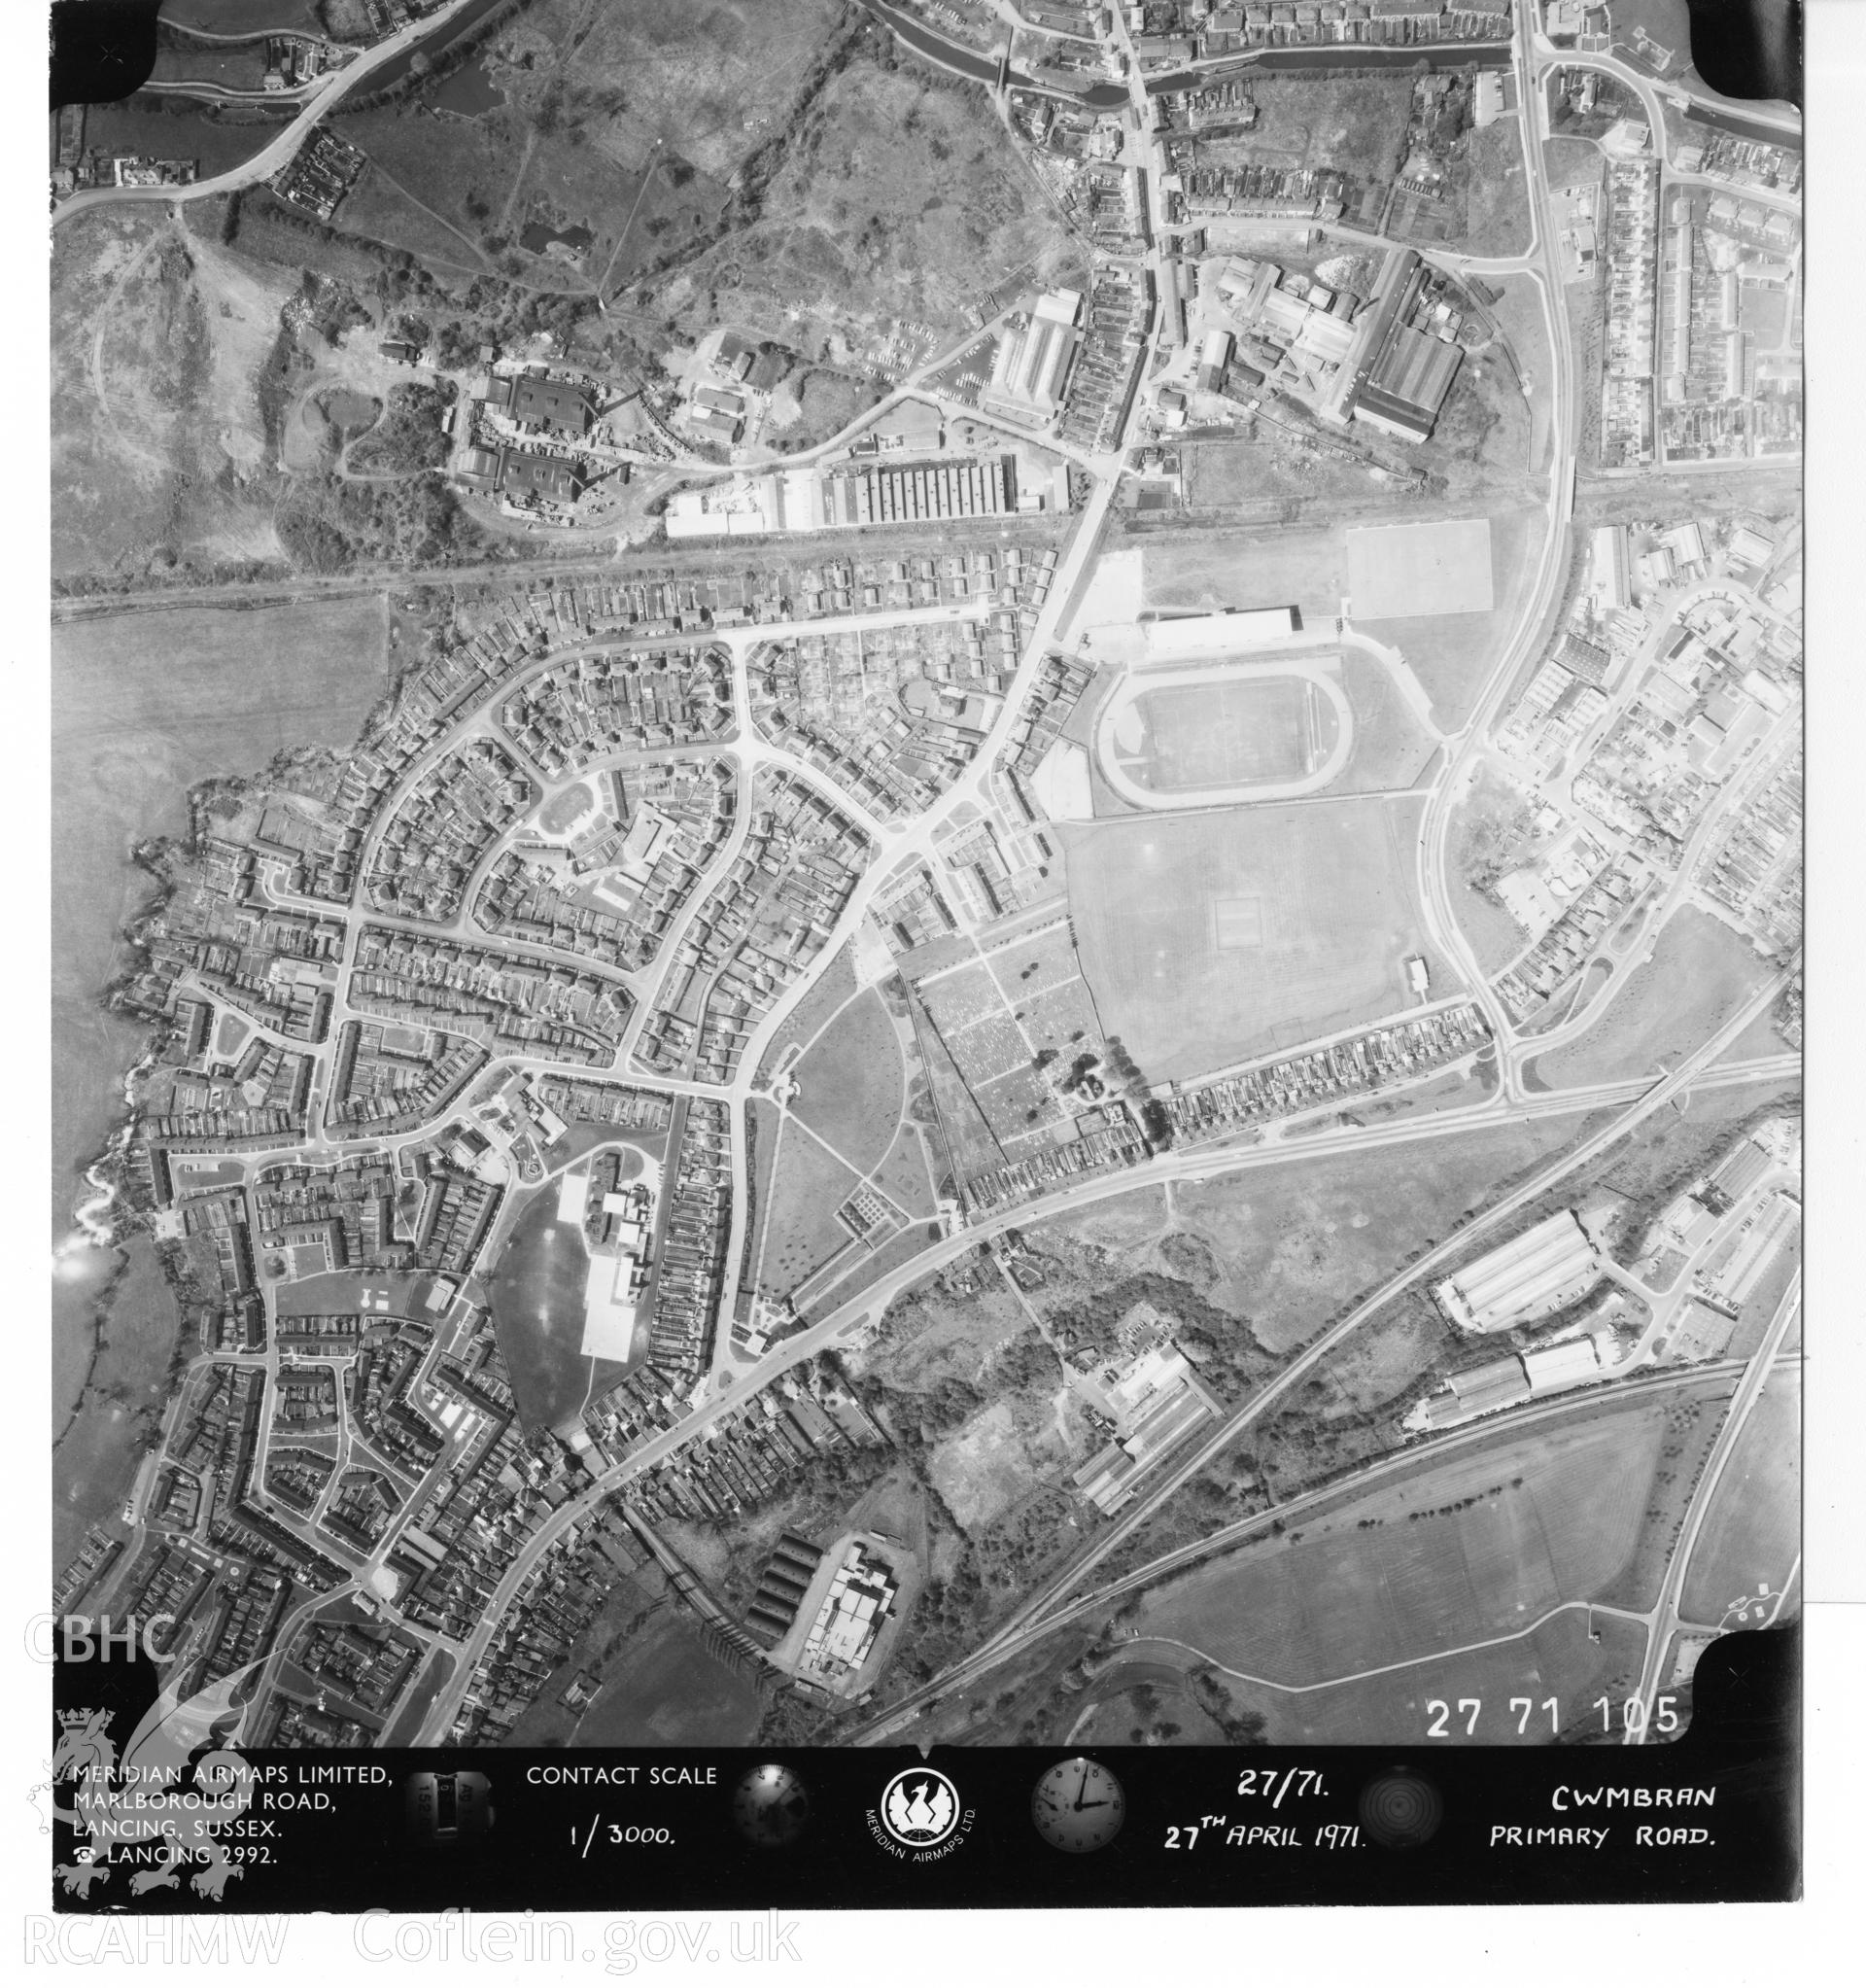 Aerial photograph of Primary Road, Cwmbran, taken on 27th April 1971. Included as part of Archaeology Wales' desk based assessment of former Llantarnam Community Primary School, Croeswen, Oakfield, Cwmbran, conducted in 2017.